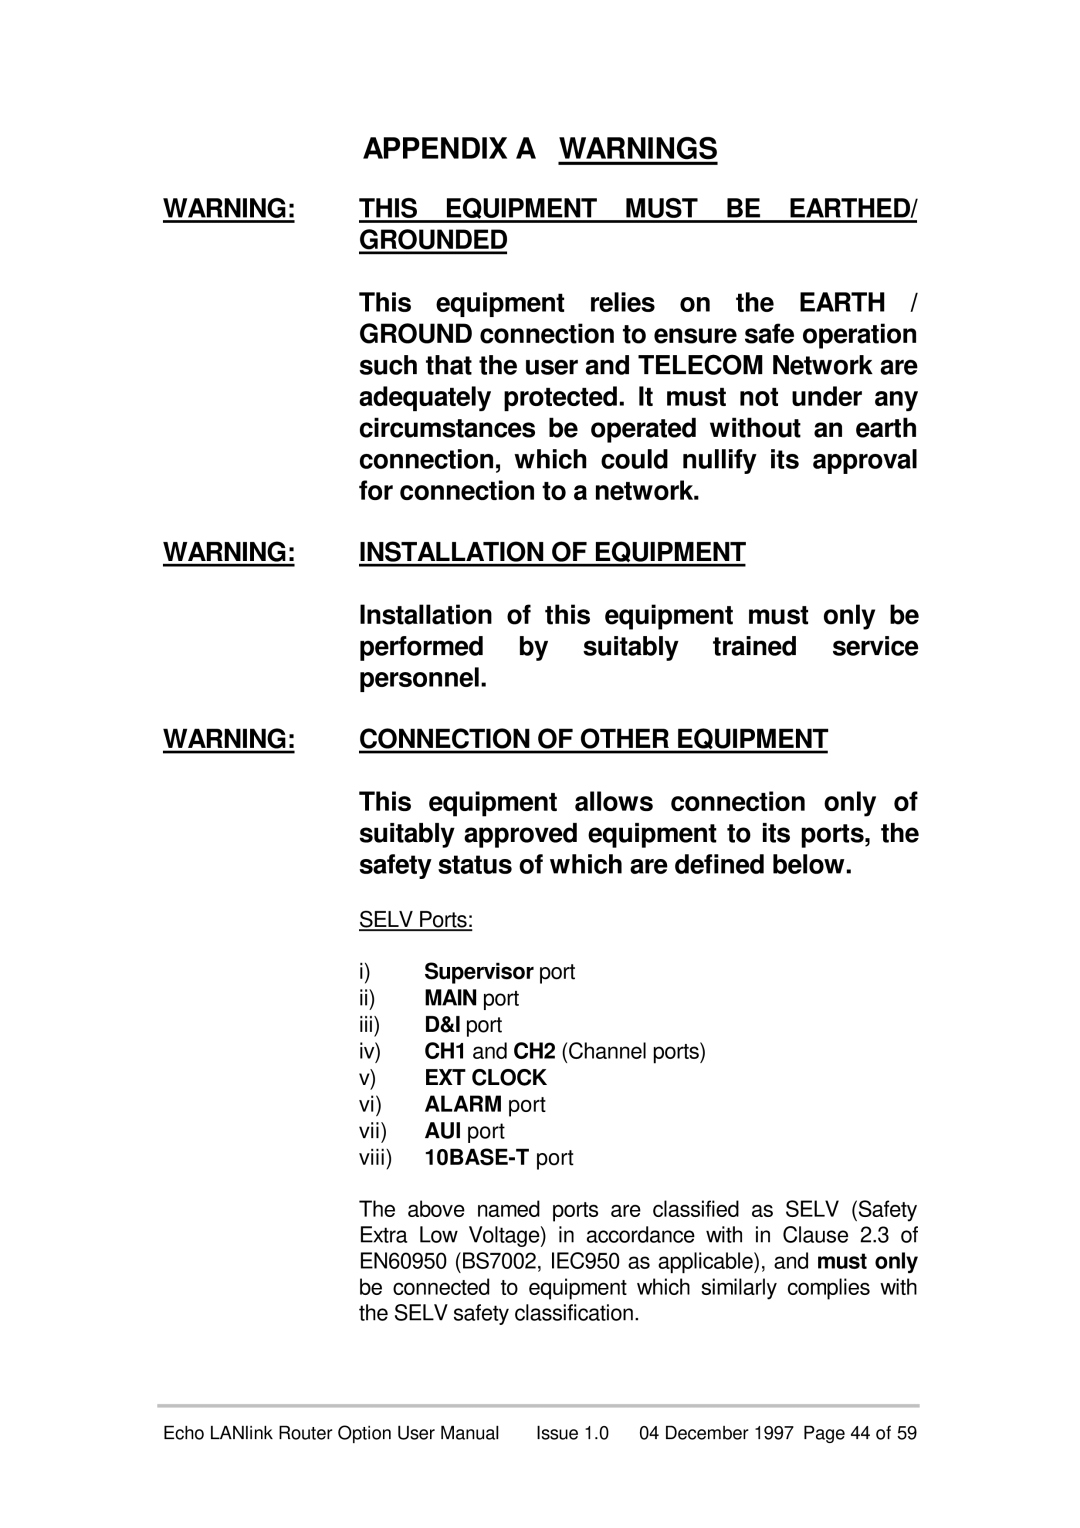 Echo EN55022 Appendix A Warnings, This Equipment Must Be Earthed, Grounded, This equipment relies on the EARTH, personnel 